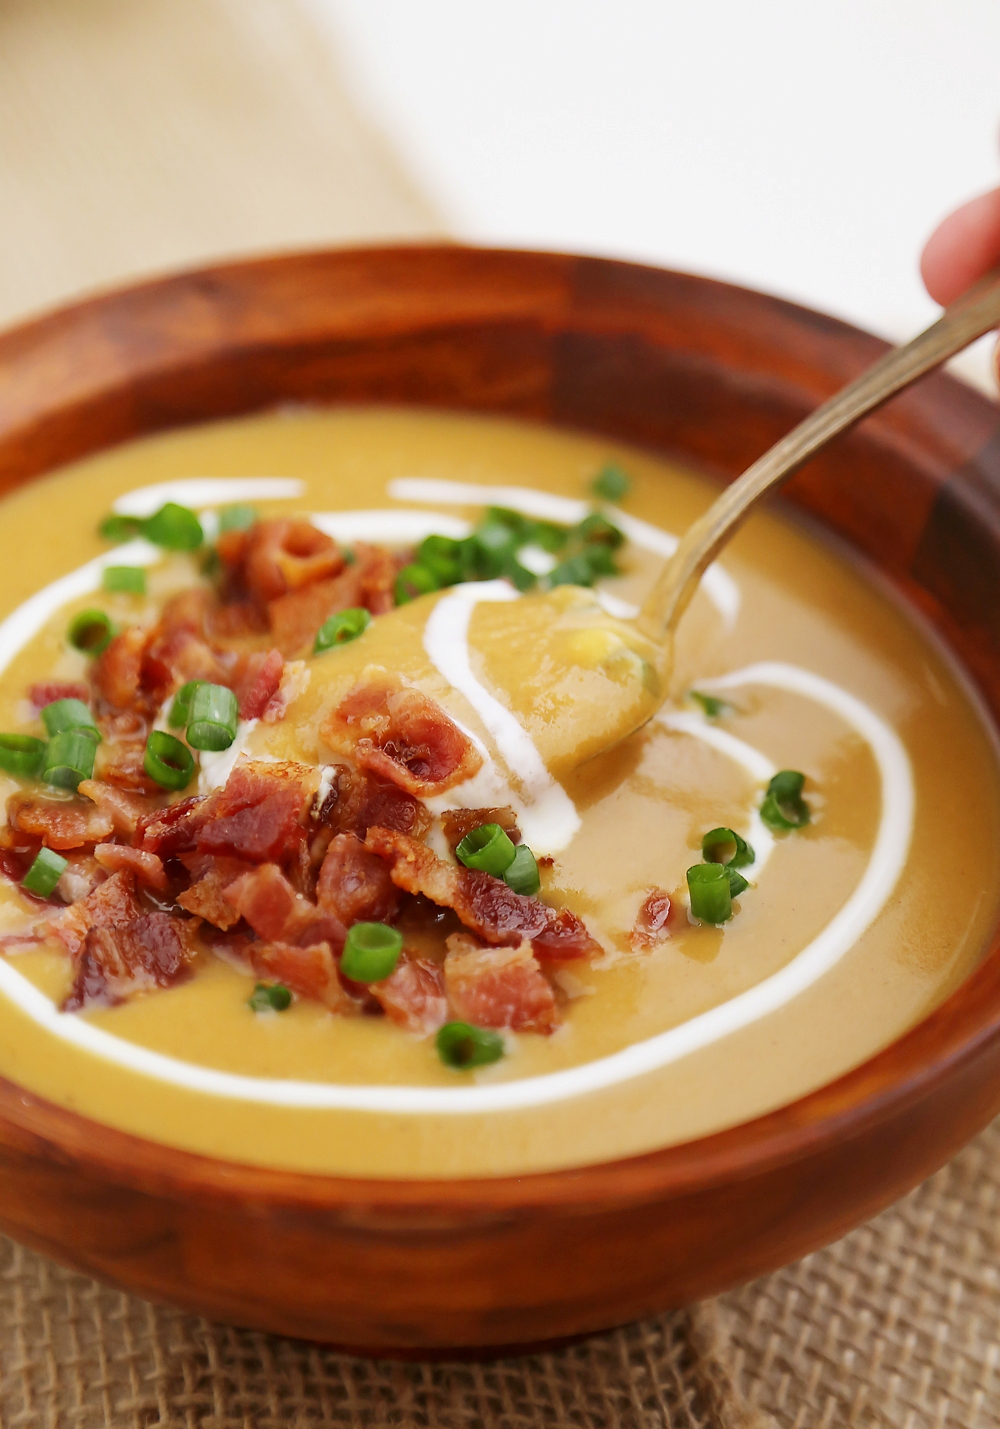 Loaded Sweet Potato Soup – Super creamy stovetop soup is healthy + easy for weeknights or holidays! Serve with salad and crusty bread. Thecomfortofcooking.com